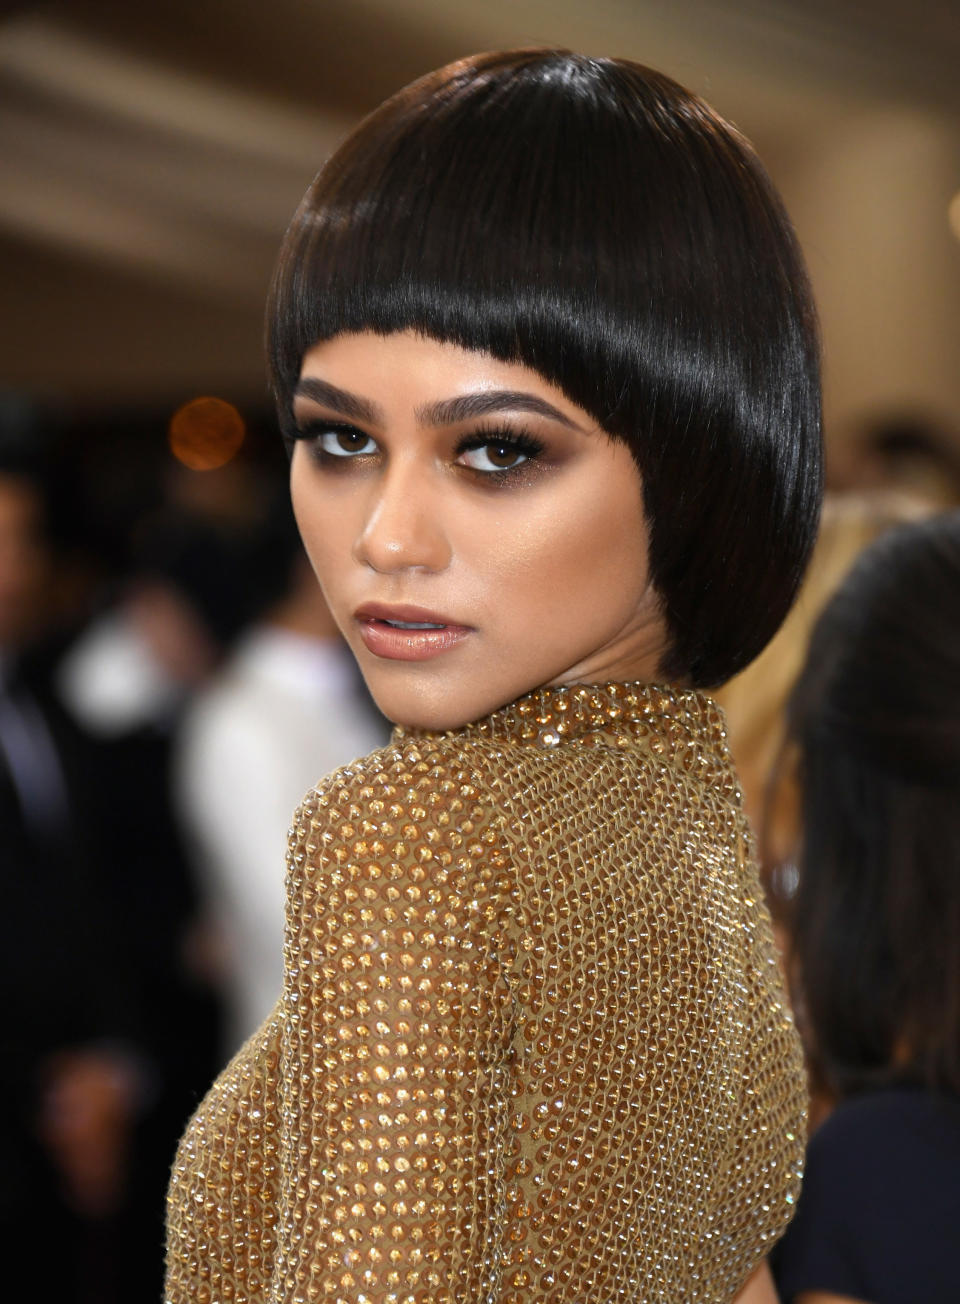 Zendaya with a short hairstyle wearing a shimmering outfit at the Met Gala